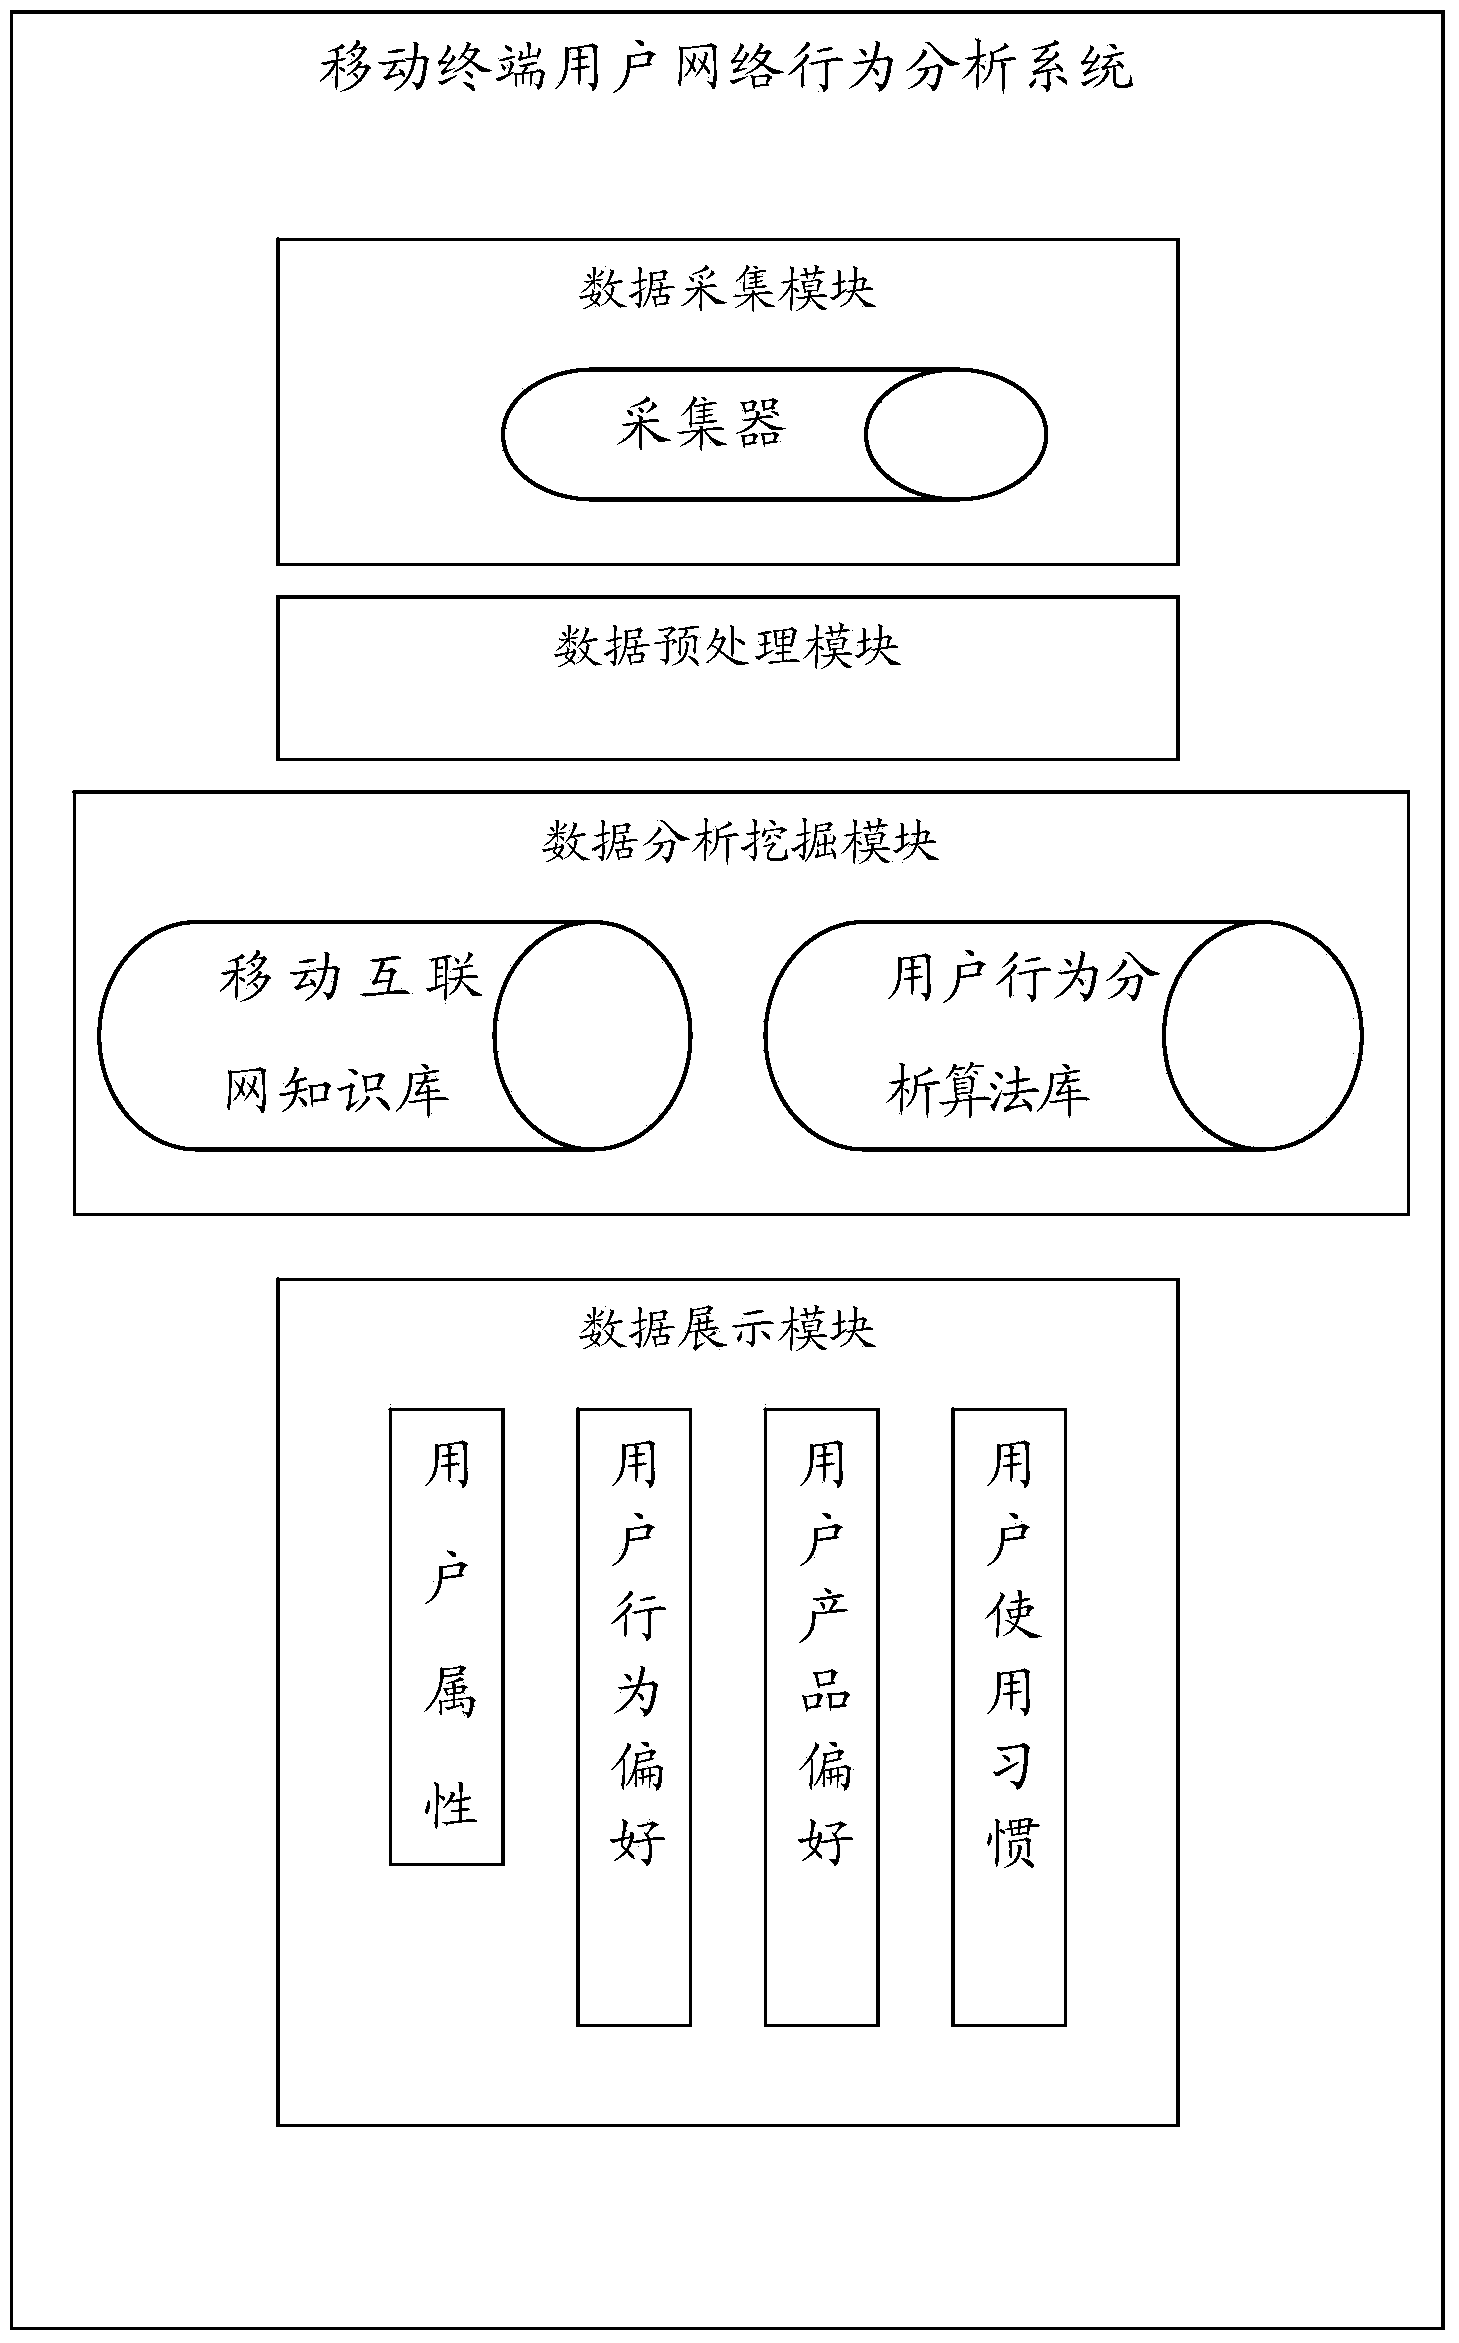 Method and system for analyzing network behaviors of mobile terminal users